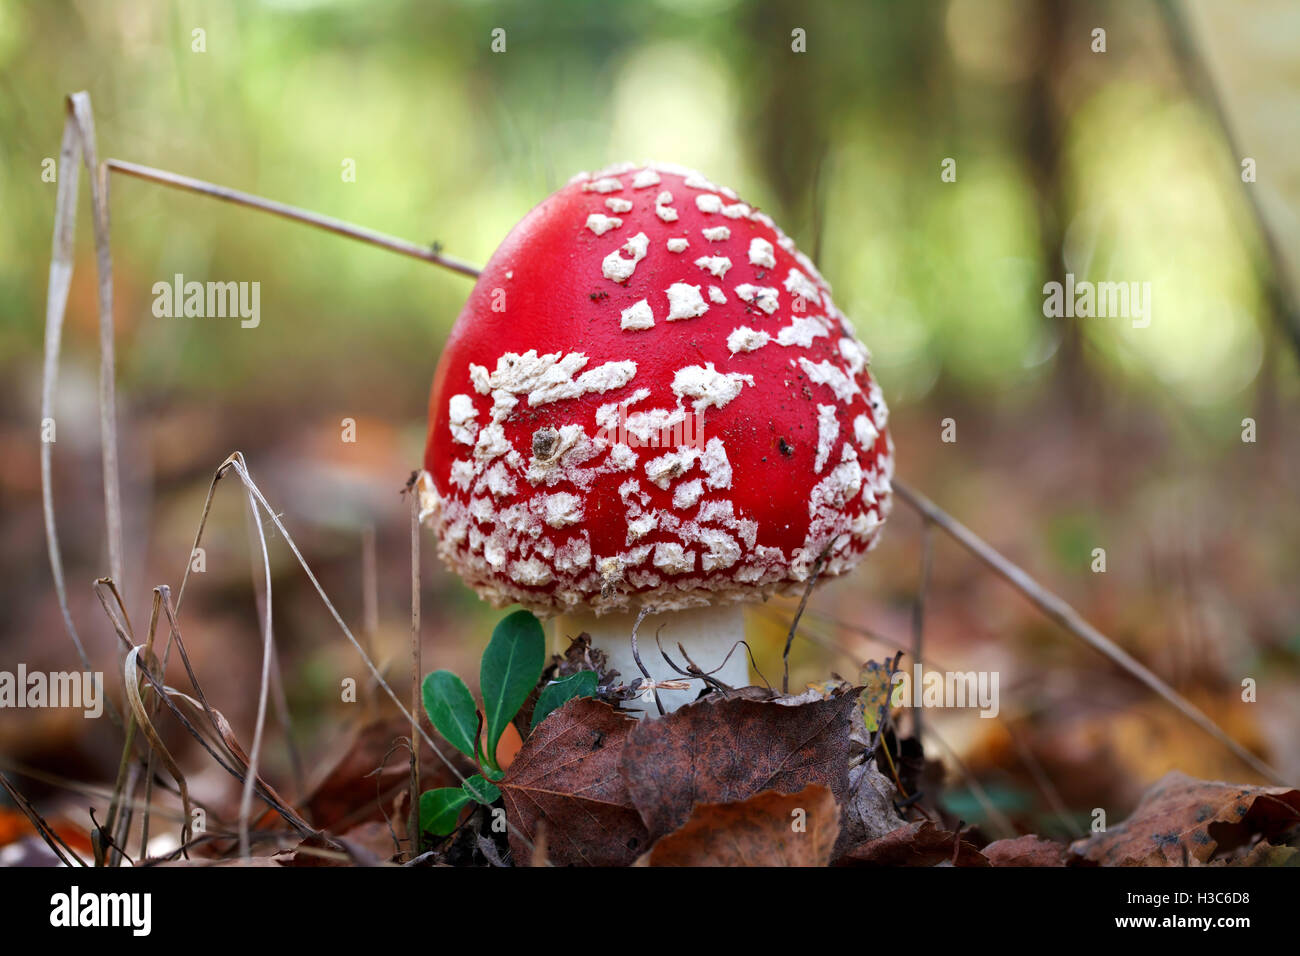 Amanita poisonous mushroom in the forest close-up Stock Photo